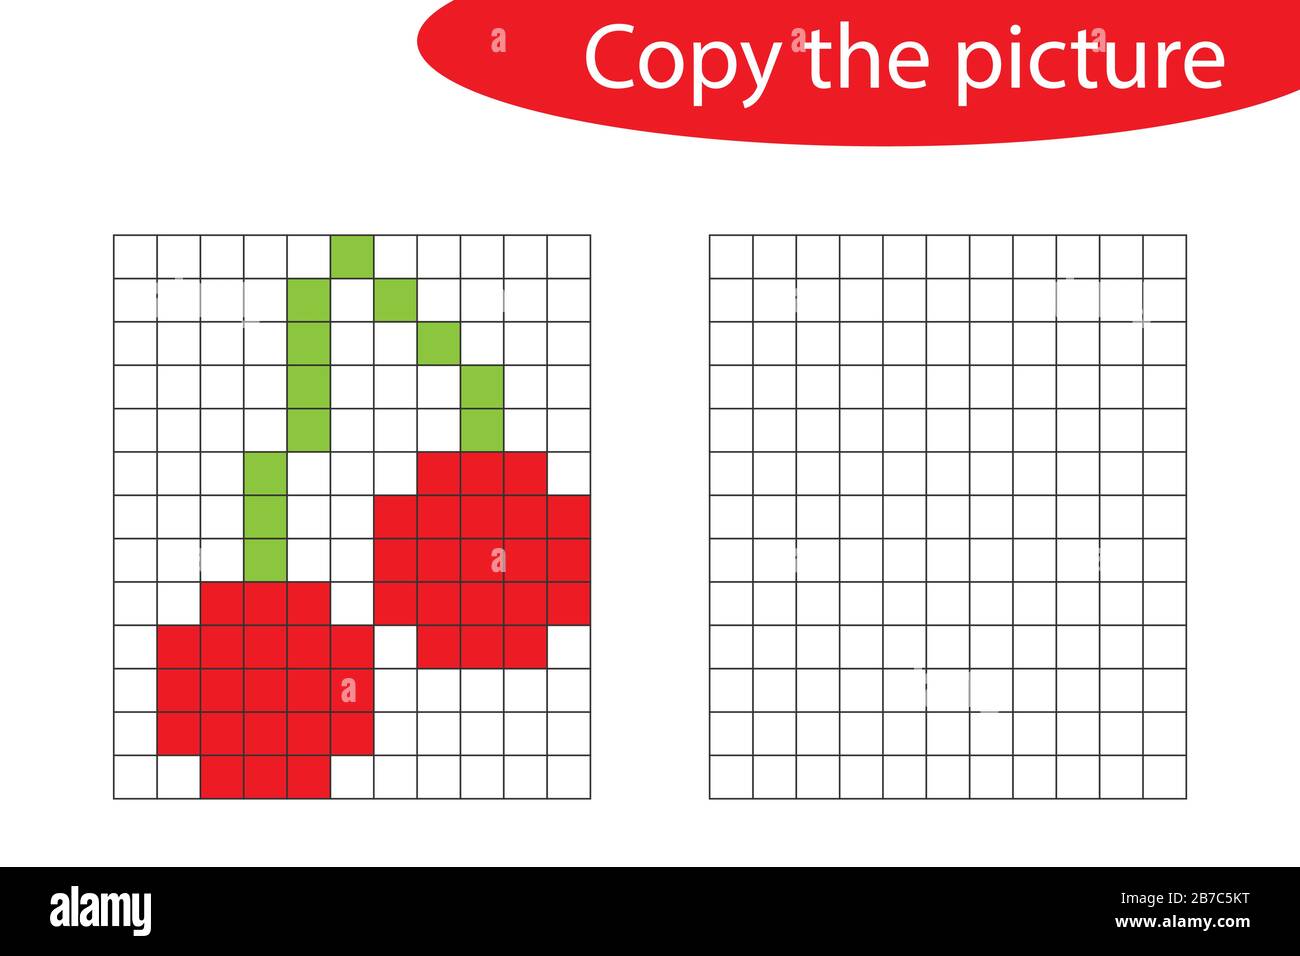 Free Graph Paper Template - Printable Graph Paper and Grid Paper